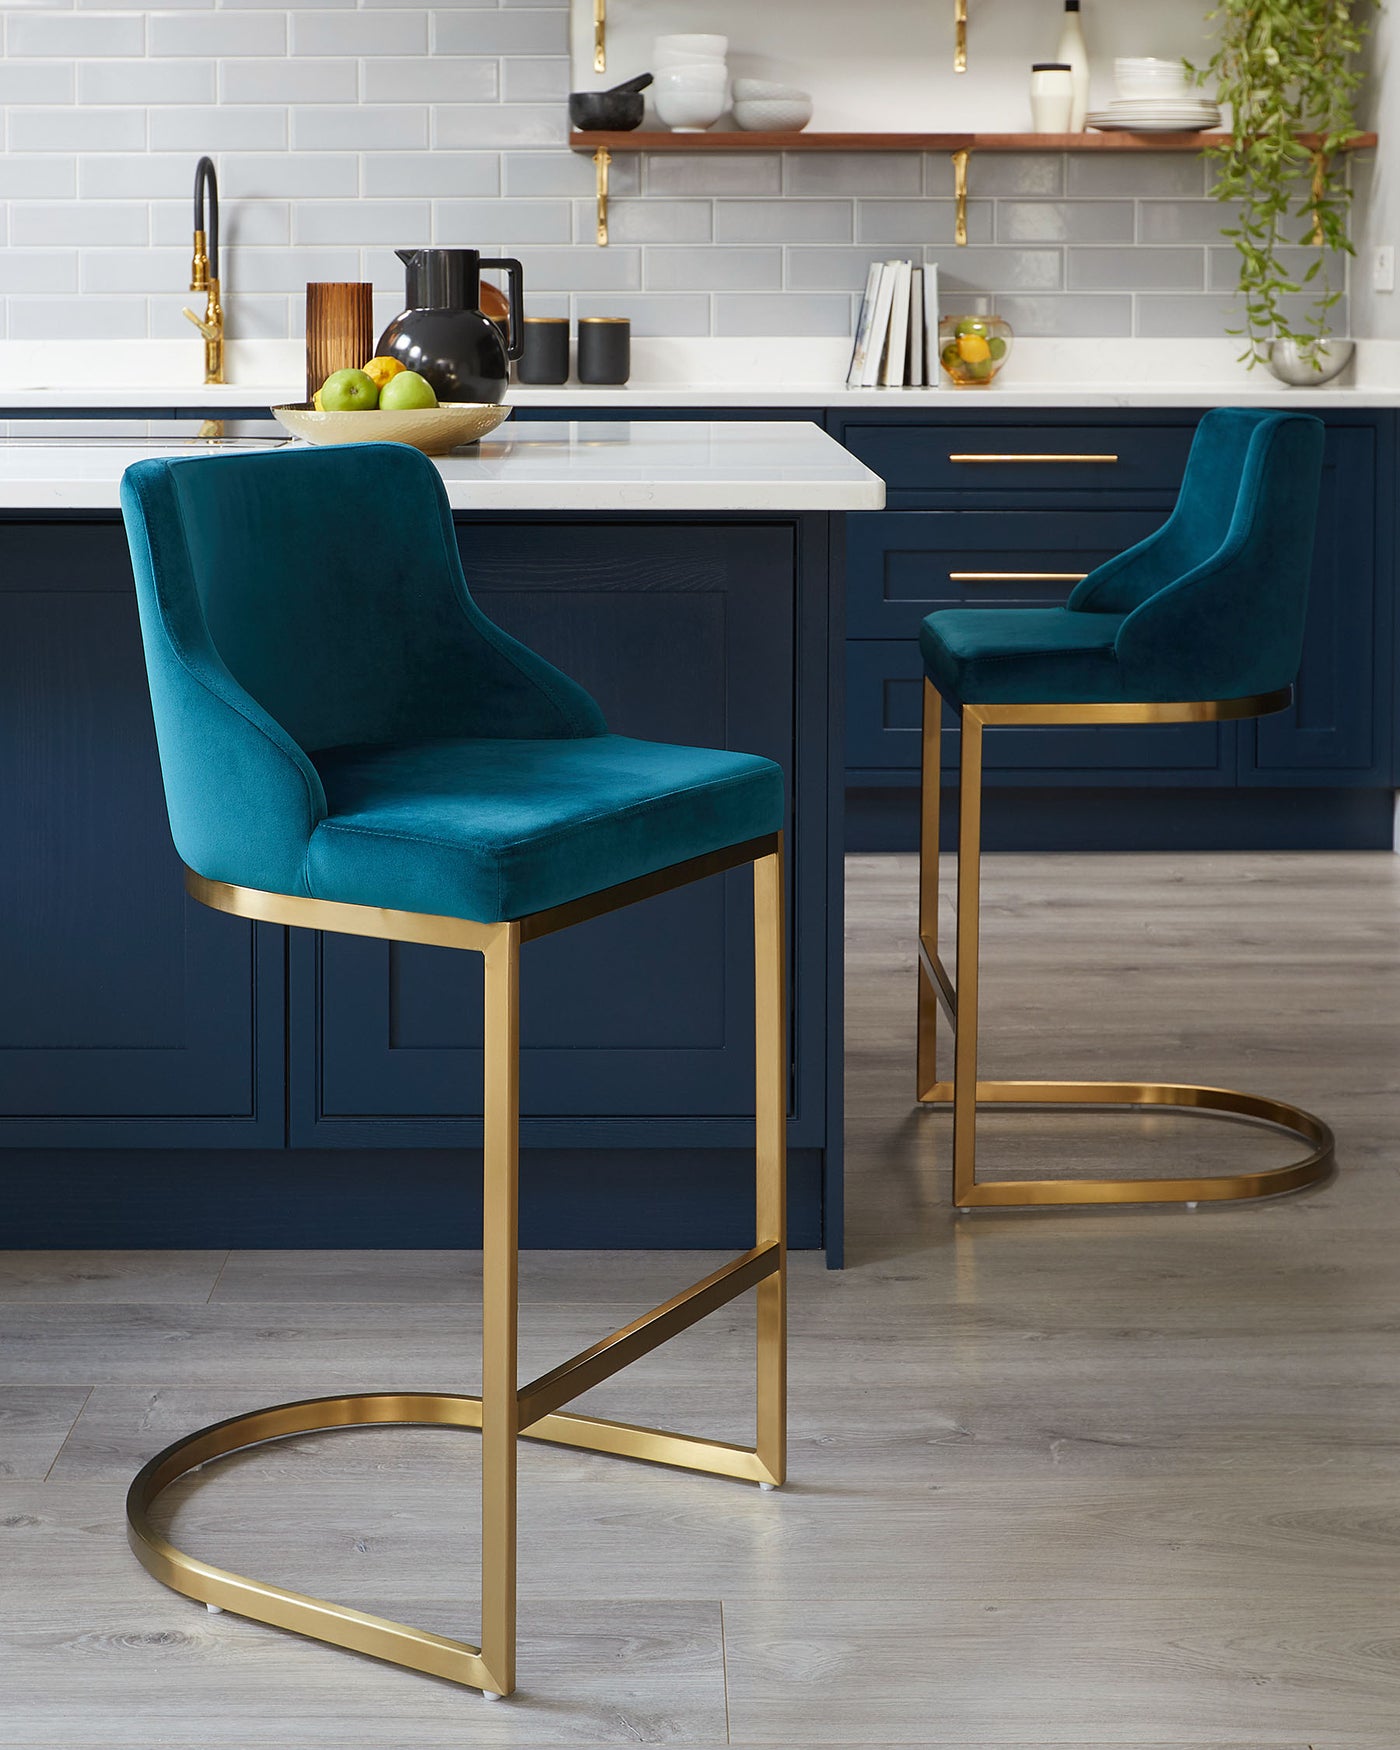 Two modern velvet upholstered bar stools with luxurious teal fabric and sleek gold metal frames, featuring a high back and integrated footrest for comfort and elegance, set against a contemporary kitchen island.